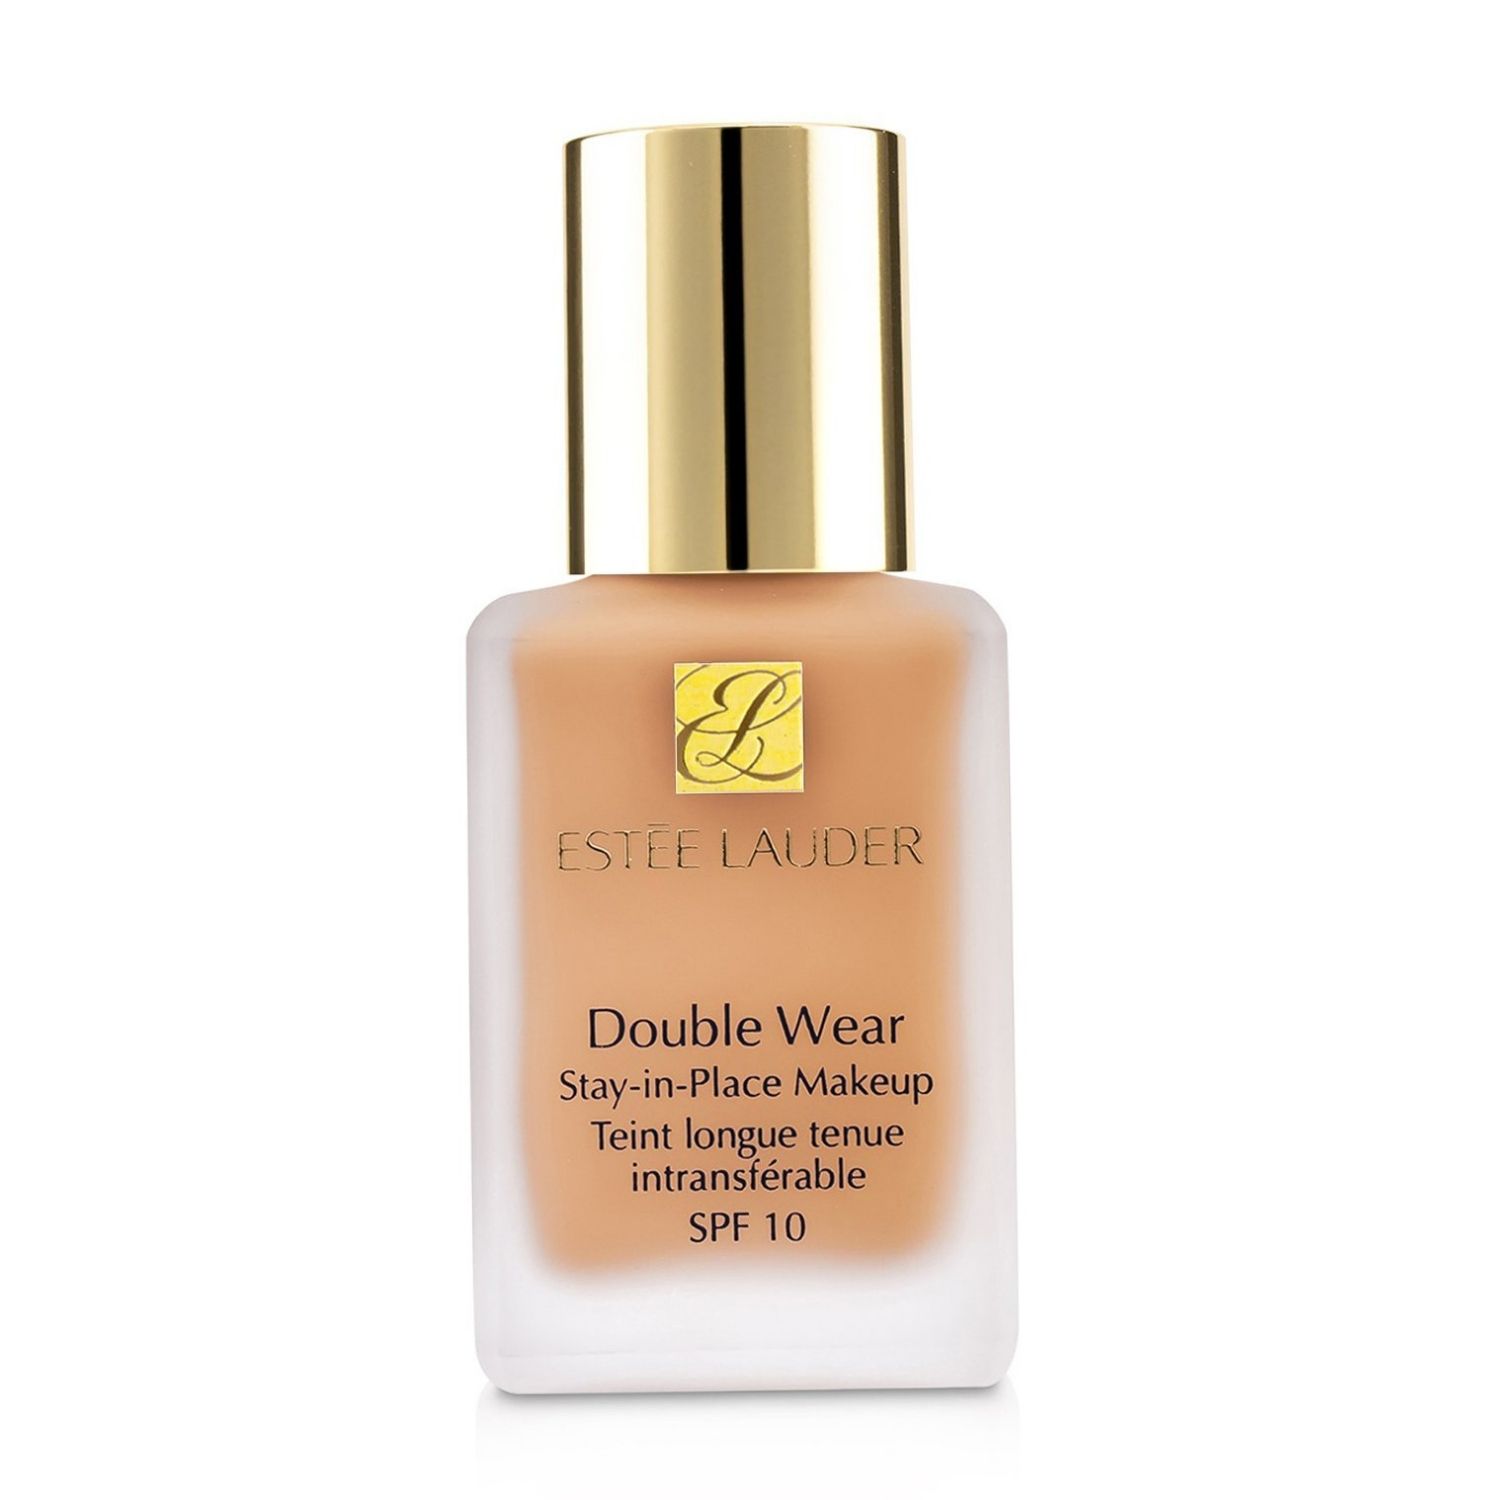 Estee Lauder Double Wear Stay-in Place Makeup Spf 10 - 2c1 Pure Beige 1 oz/30 ml - image 1 of 5